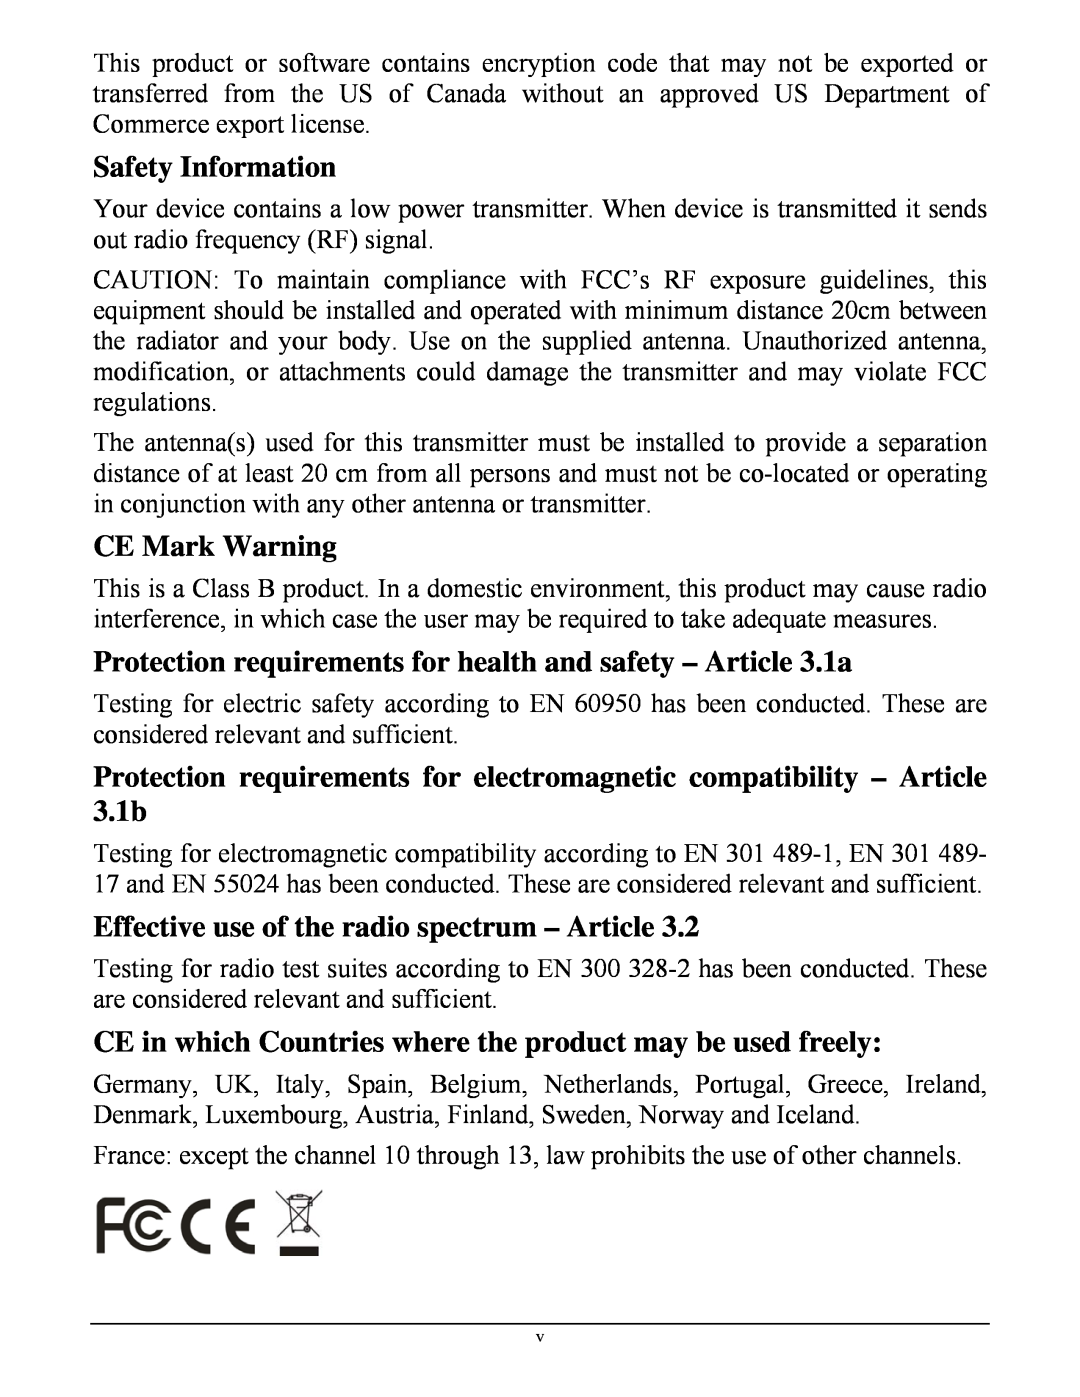 TRENDnet TEW623PI manual Safety Information, CE Mark Warning, Protection requirements for health and safety - Article 3.1a 